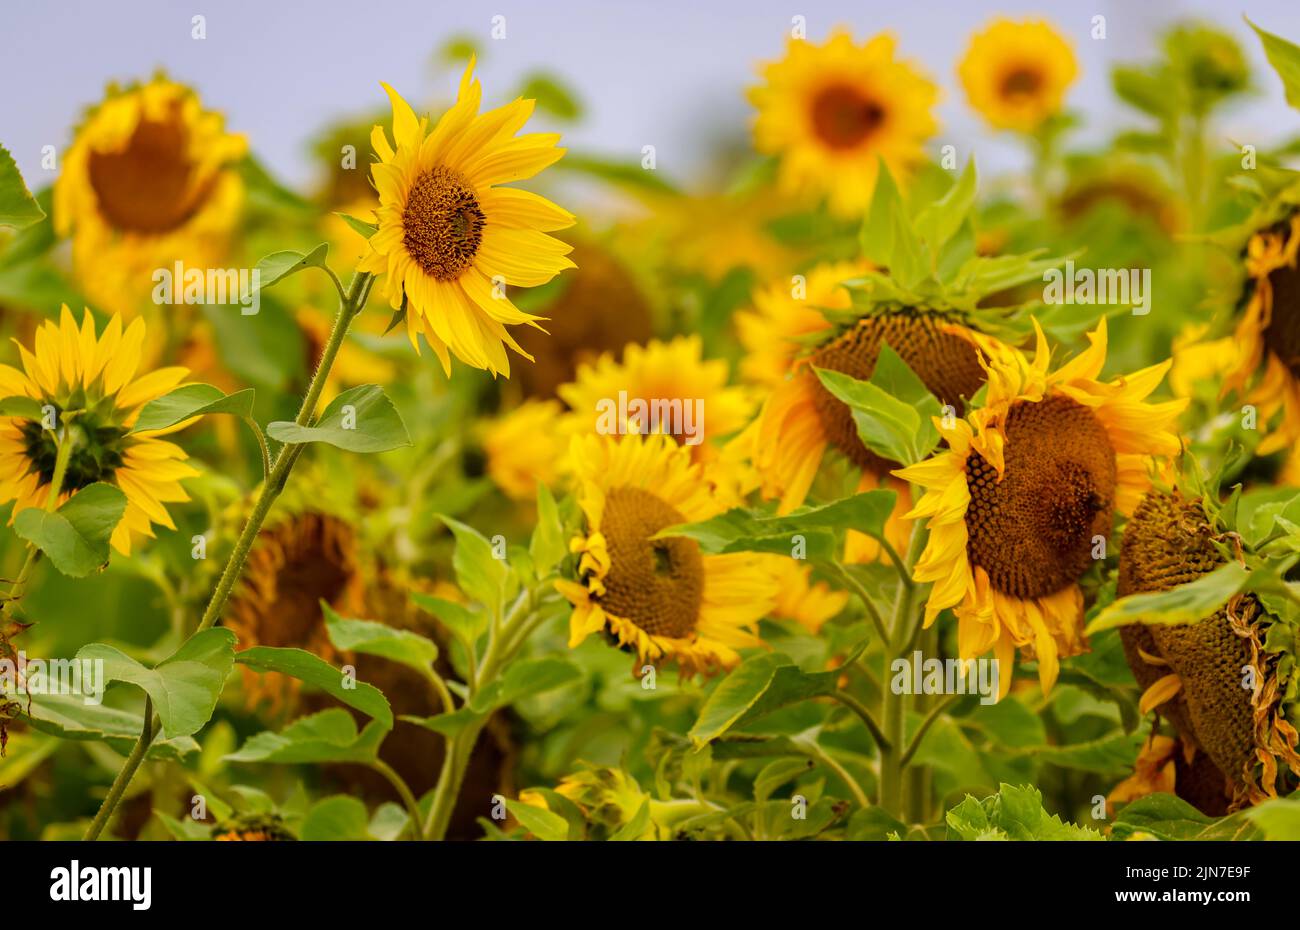 Sunflowers growing in a field with bright yellow flower heads. Agricultural harvest of sunflower seeds for oil production. Dublin, Ireland Stock Photo